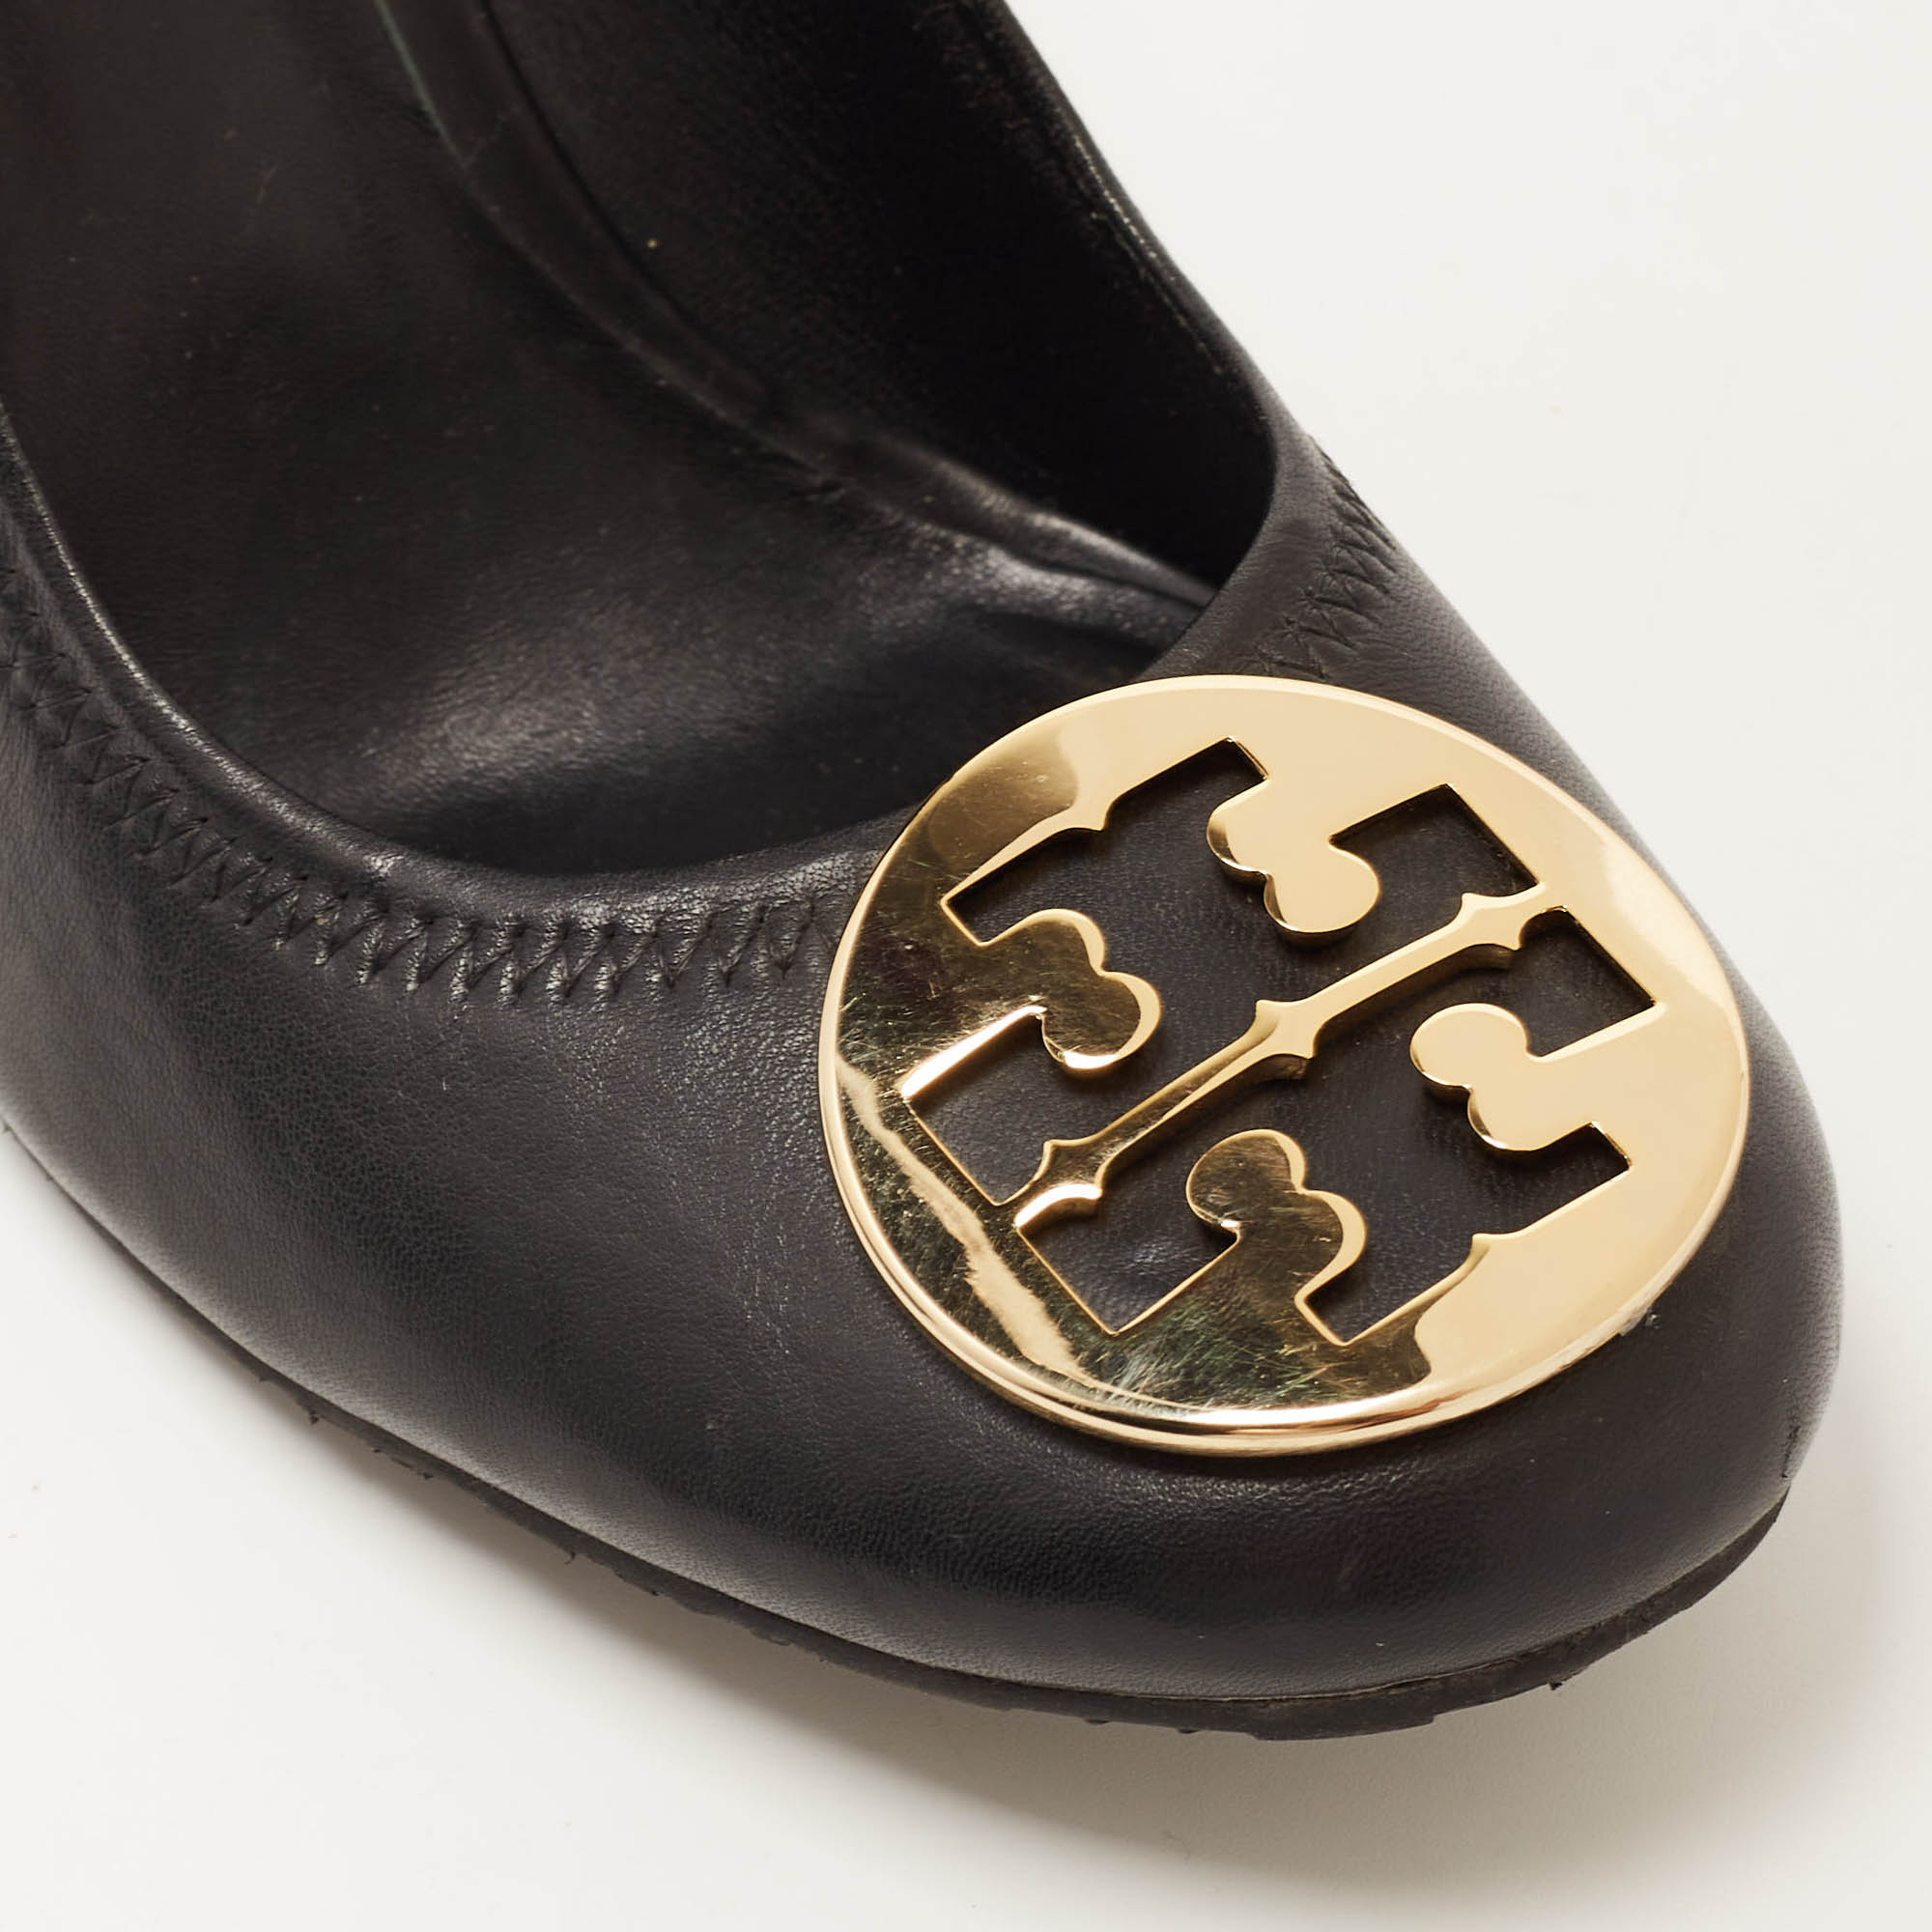 Tory Burch Black Leather Chelsea Wedge Pumps Size 40.5